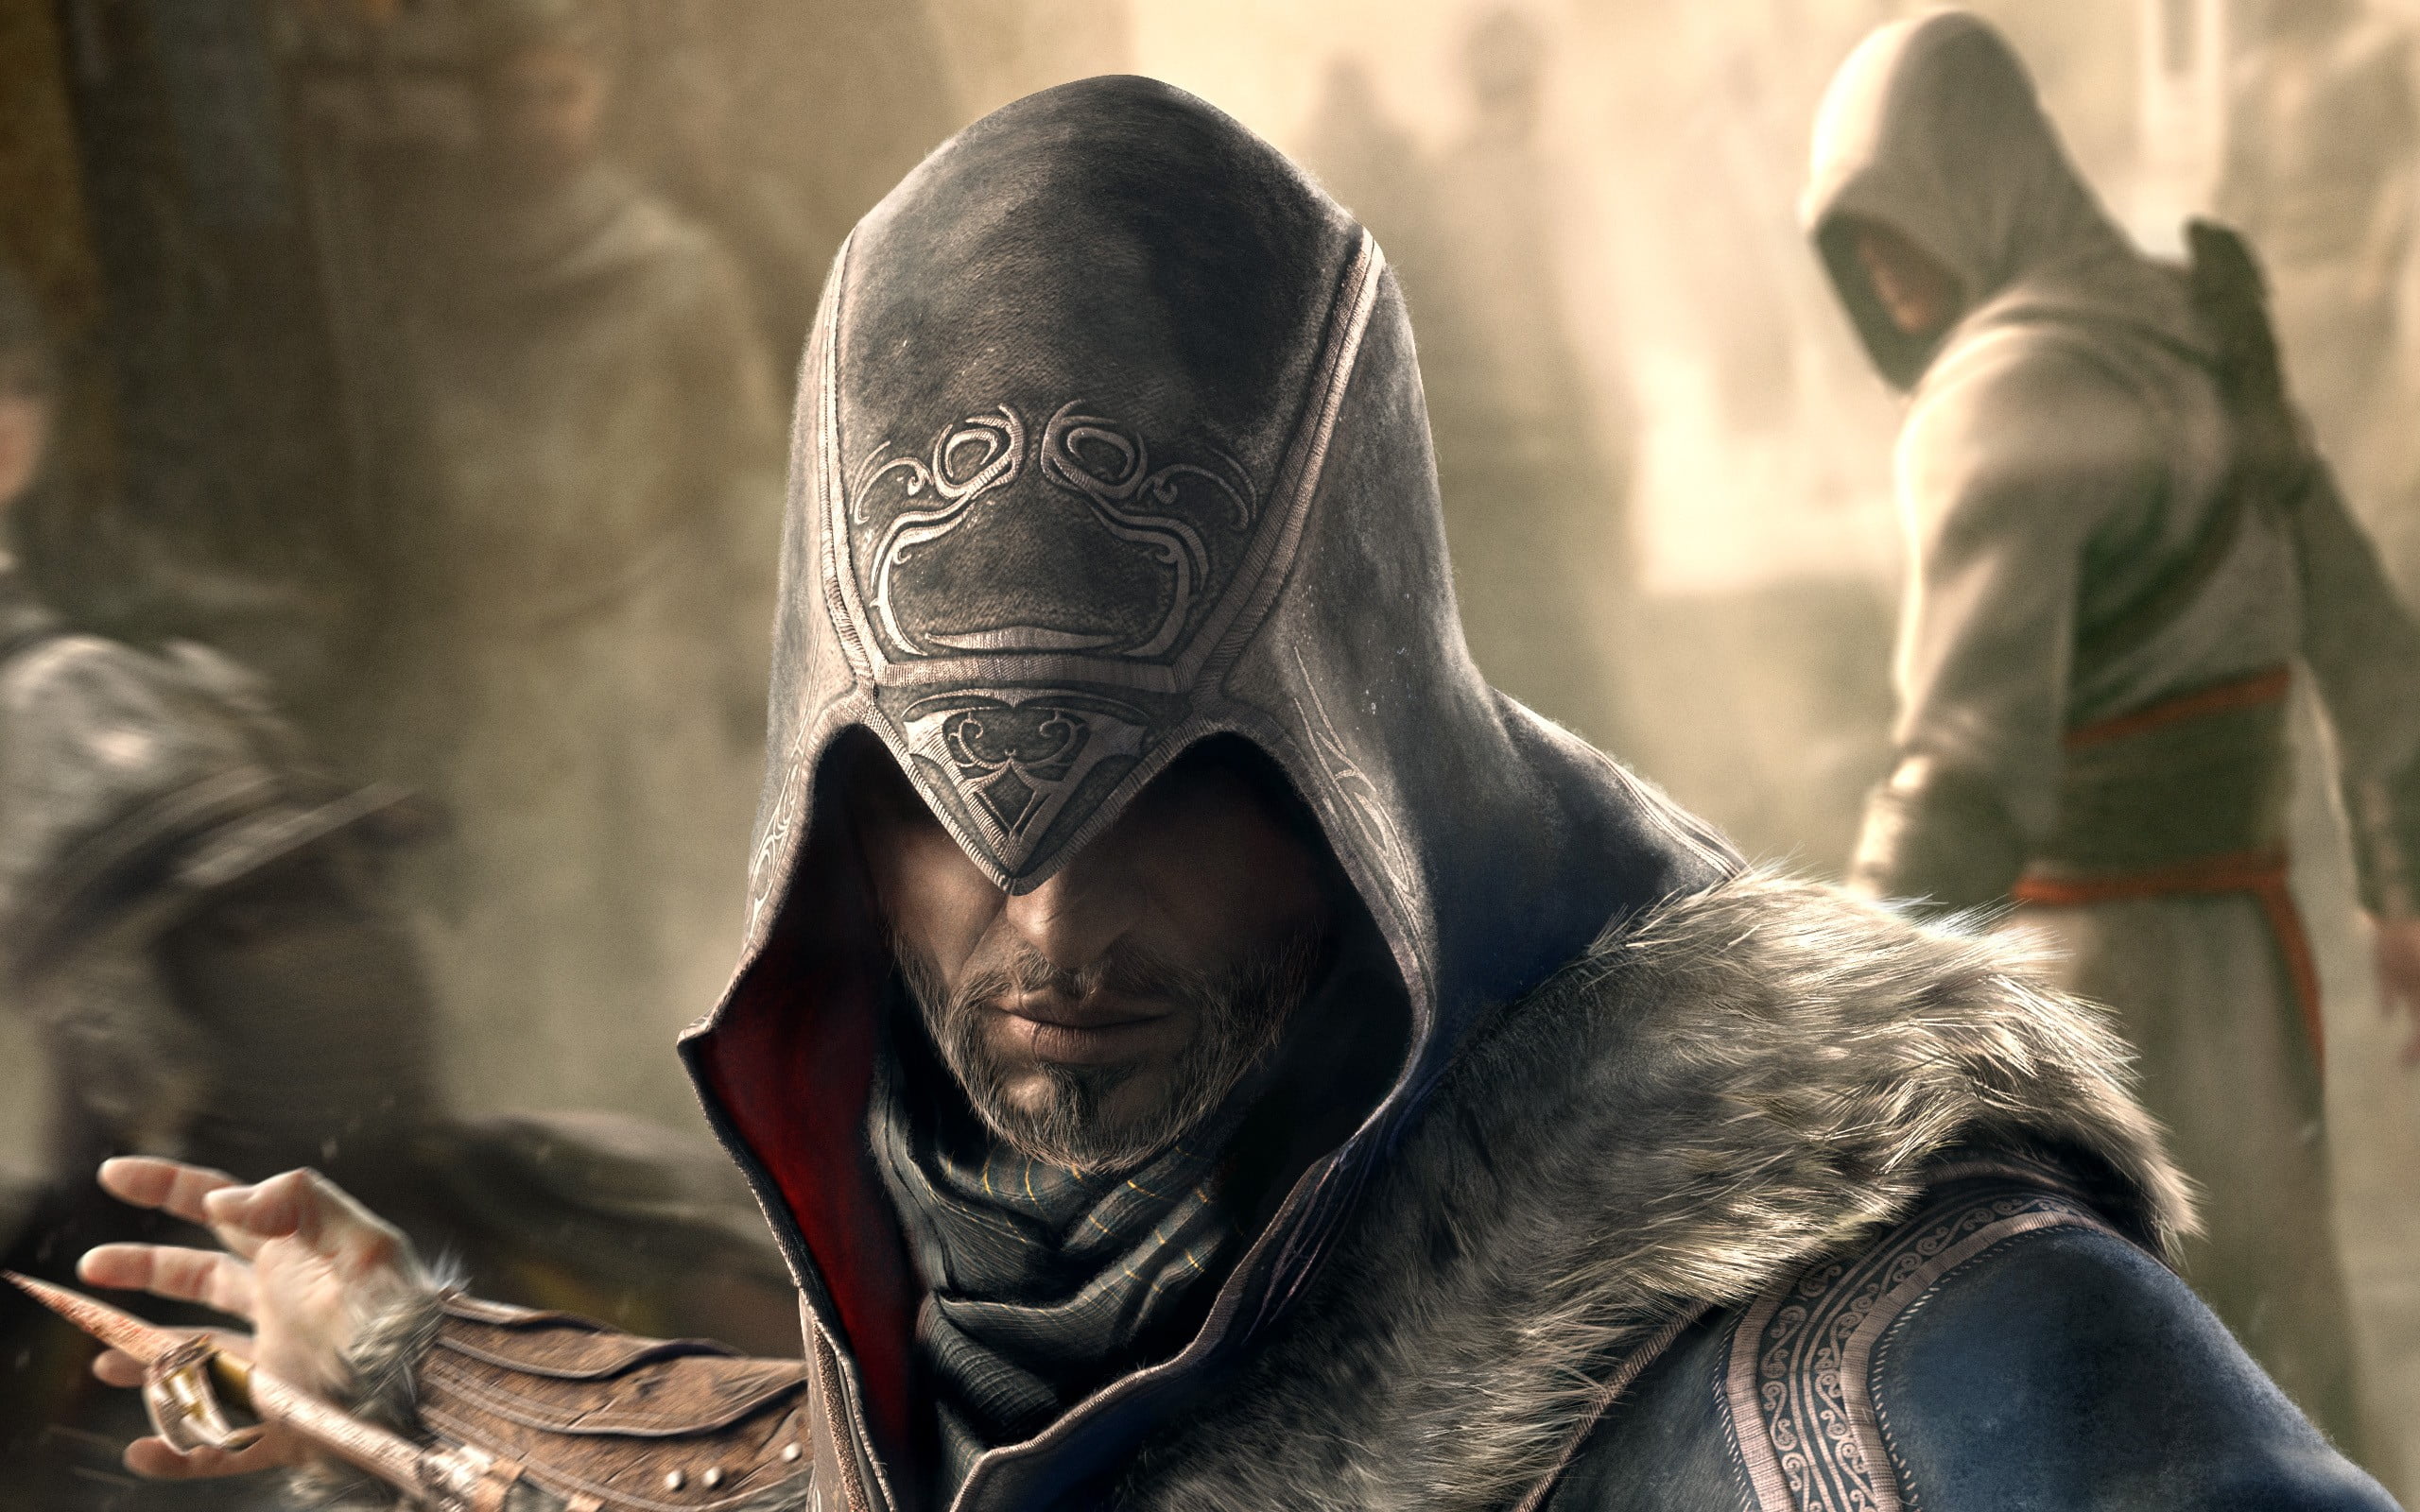 Assassin's Creed graphic wallpaper, Assassin's Creed, video games